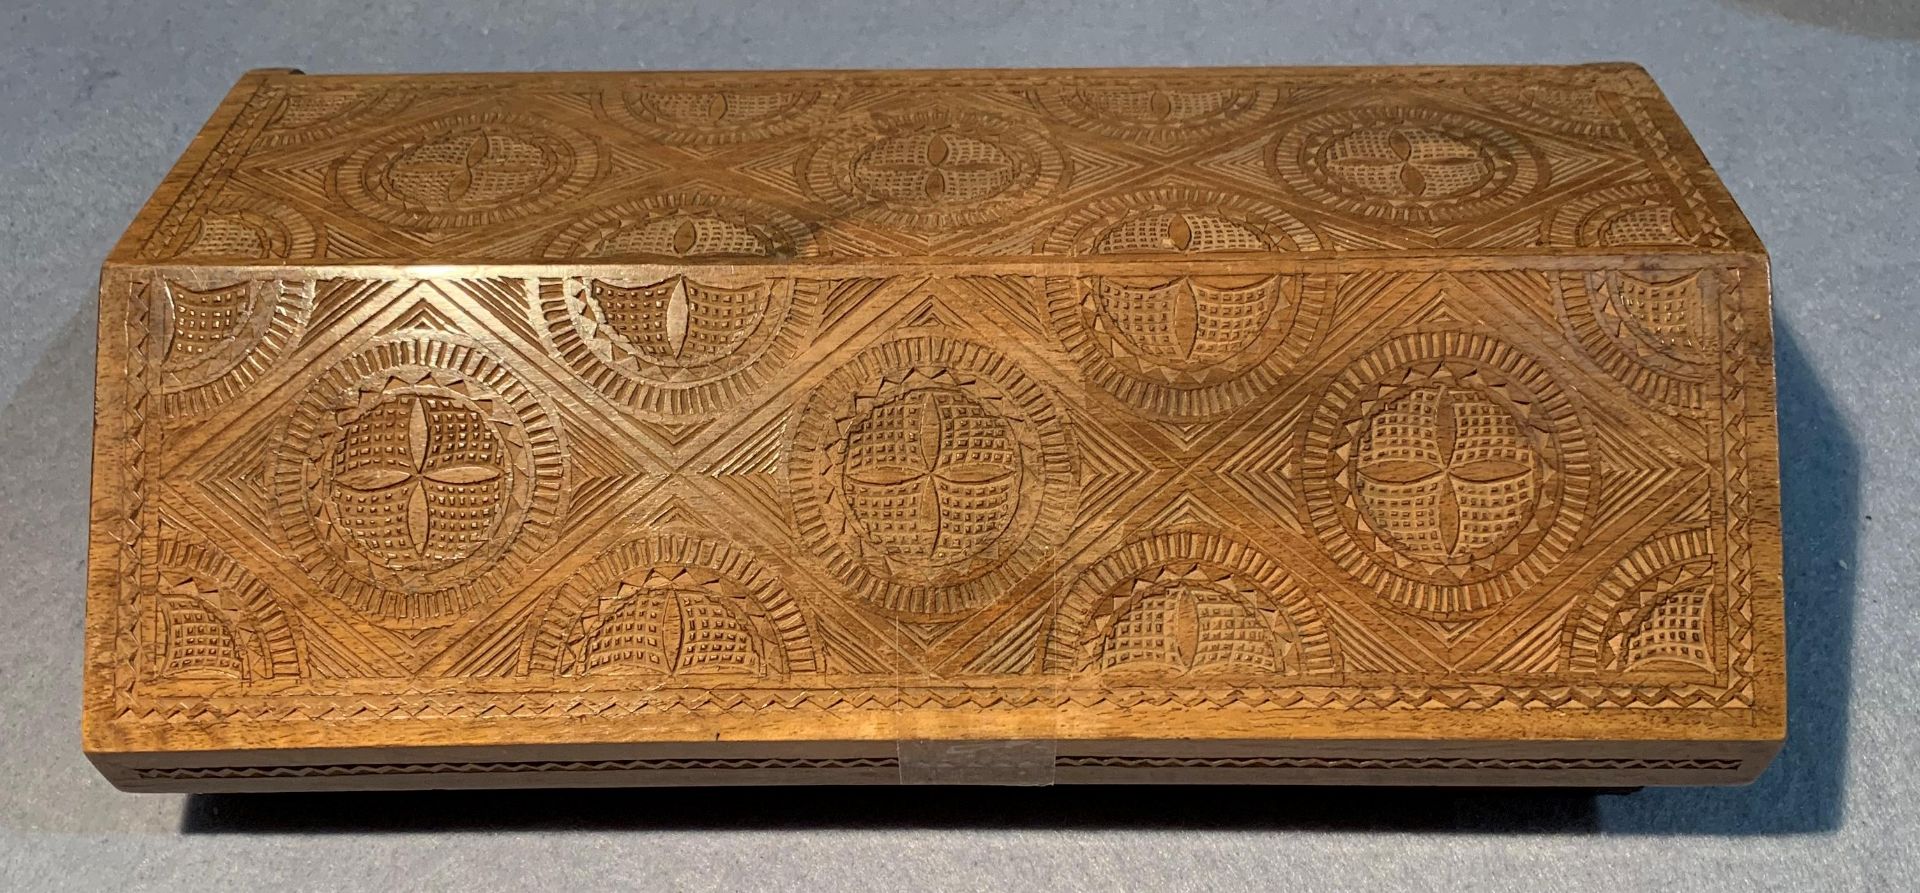 Contents to carved wooden box - assorted world coins - Image 2 of 2